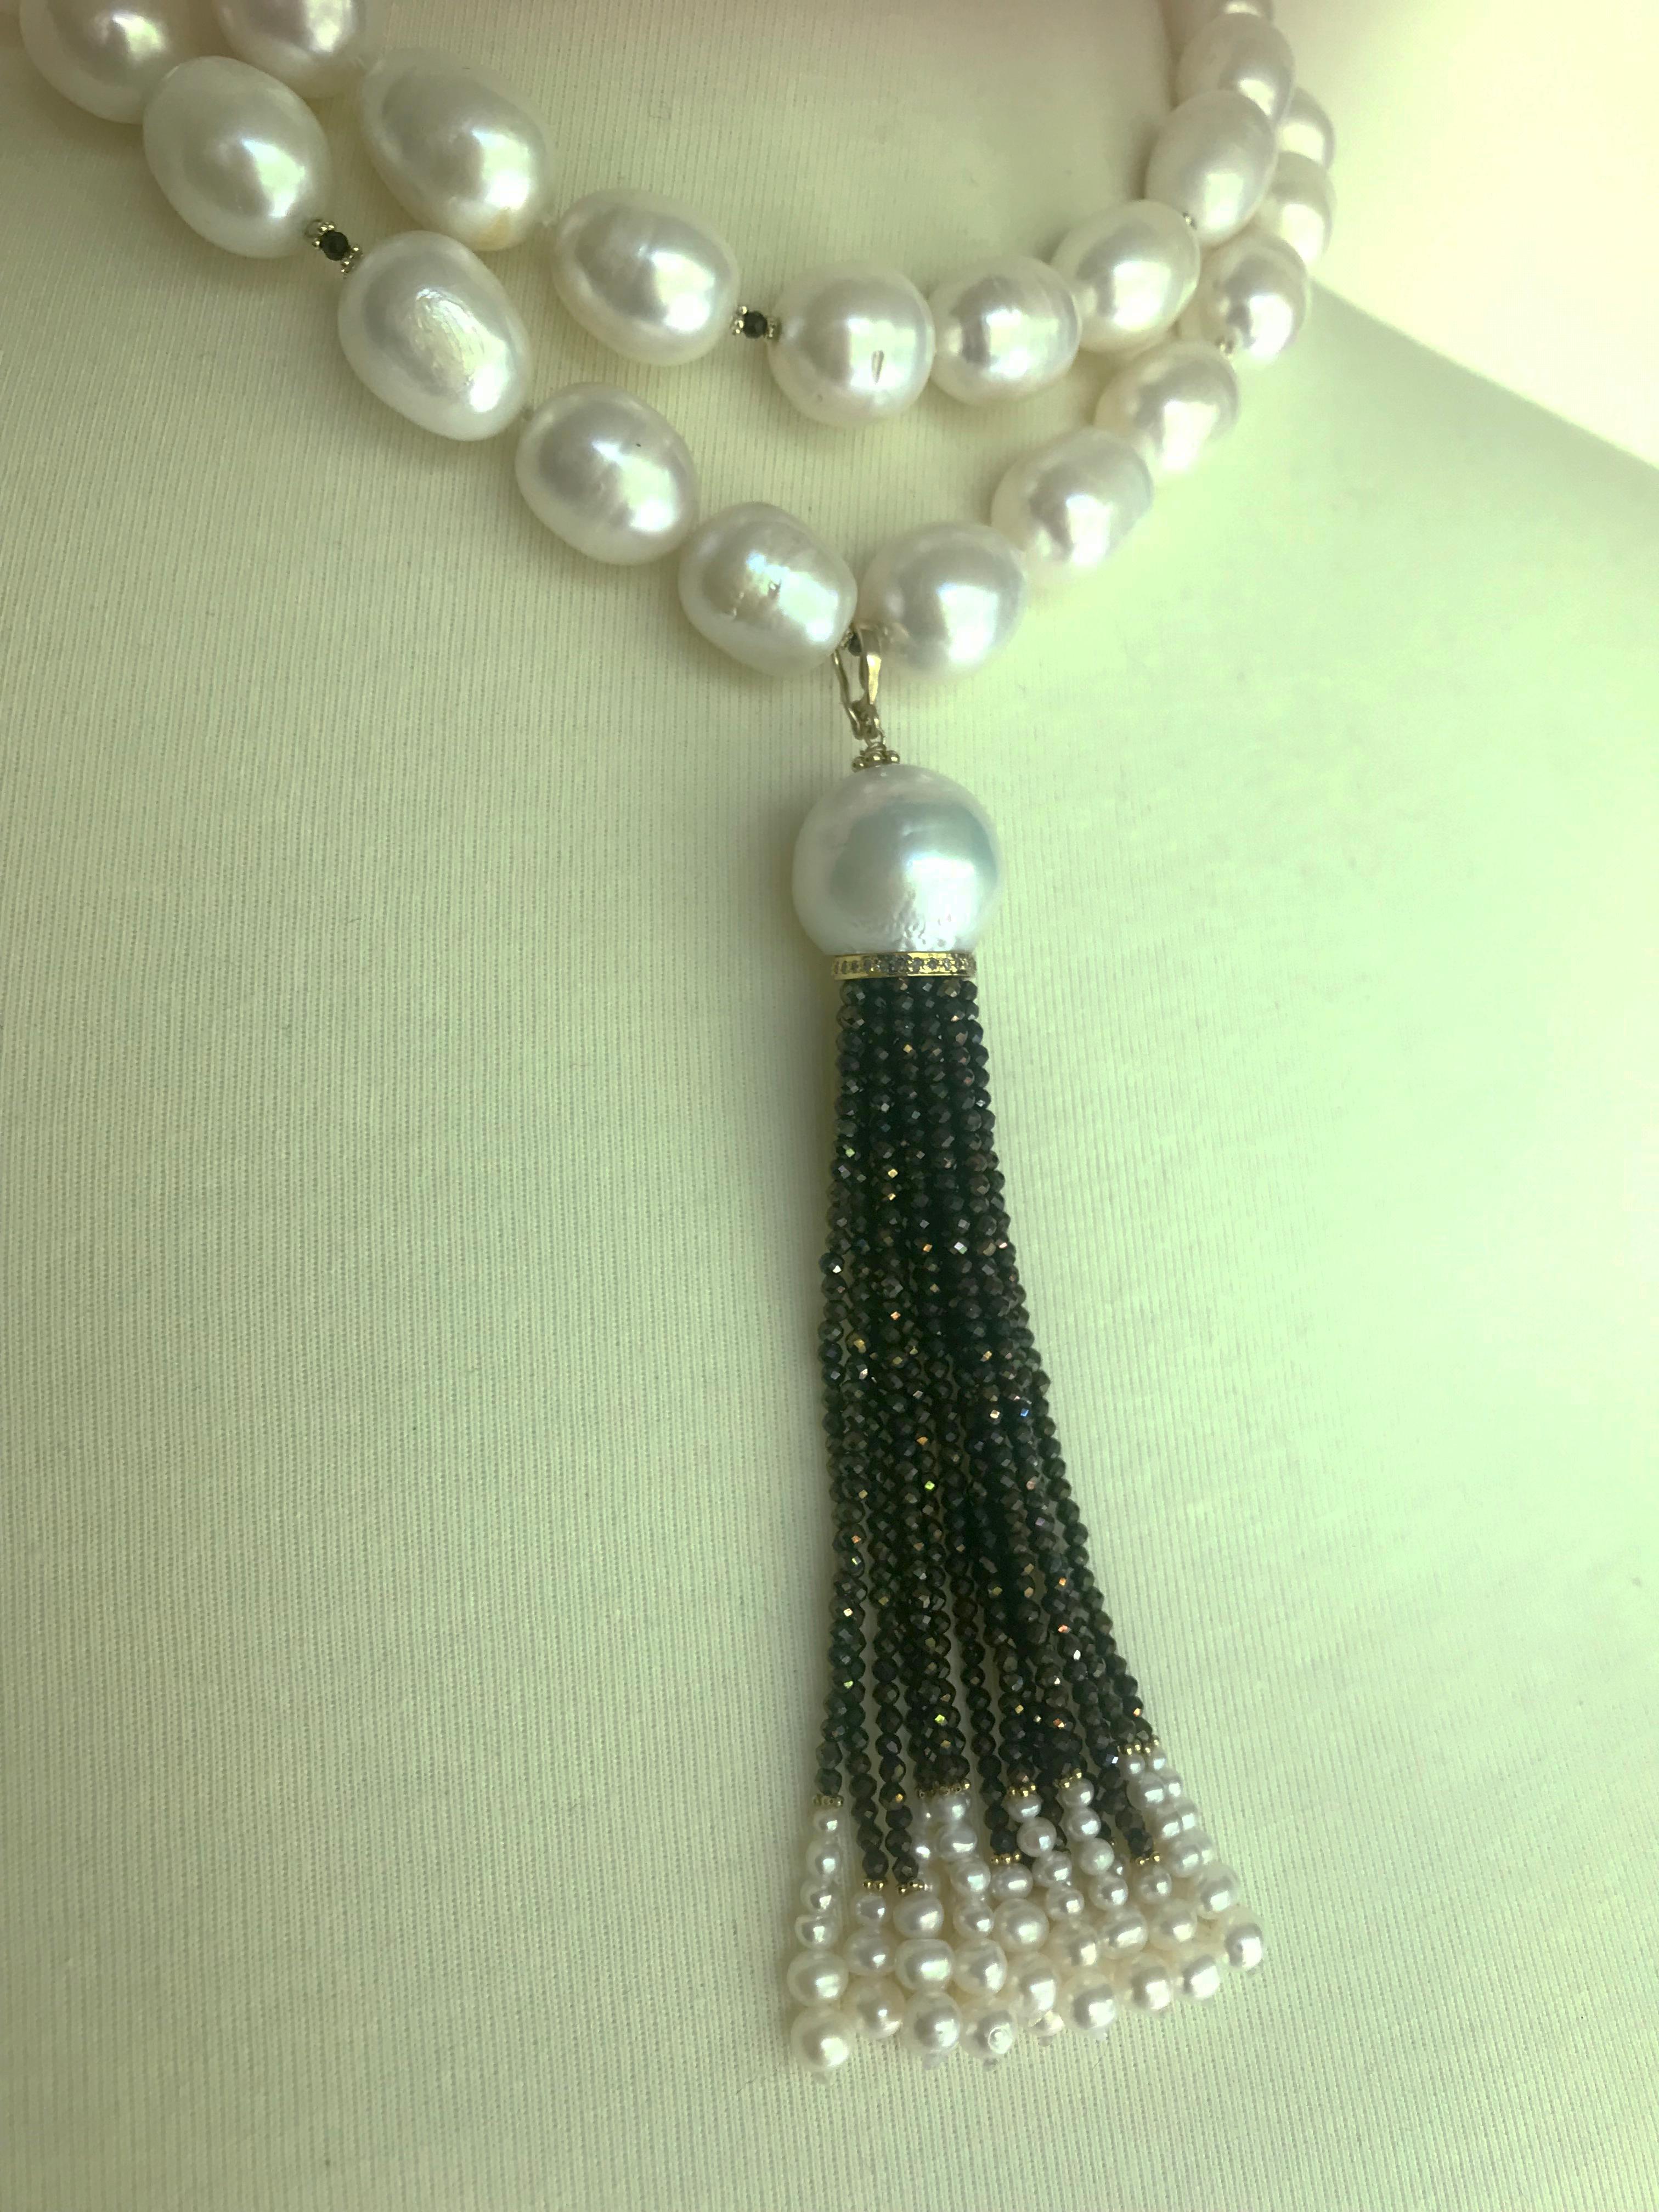 This magnificent sautoir is made from large baroque pearls with a removable tassel and 14k yellow gold clasp and beads. The beautiful tassel is composed of a large baroque pearl, resting on a diamond-encrusted 14k yellow gold roundel follow by black